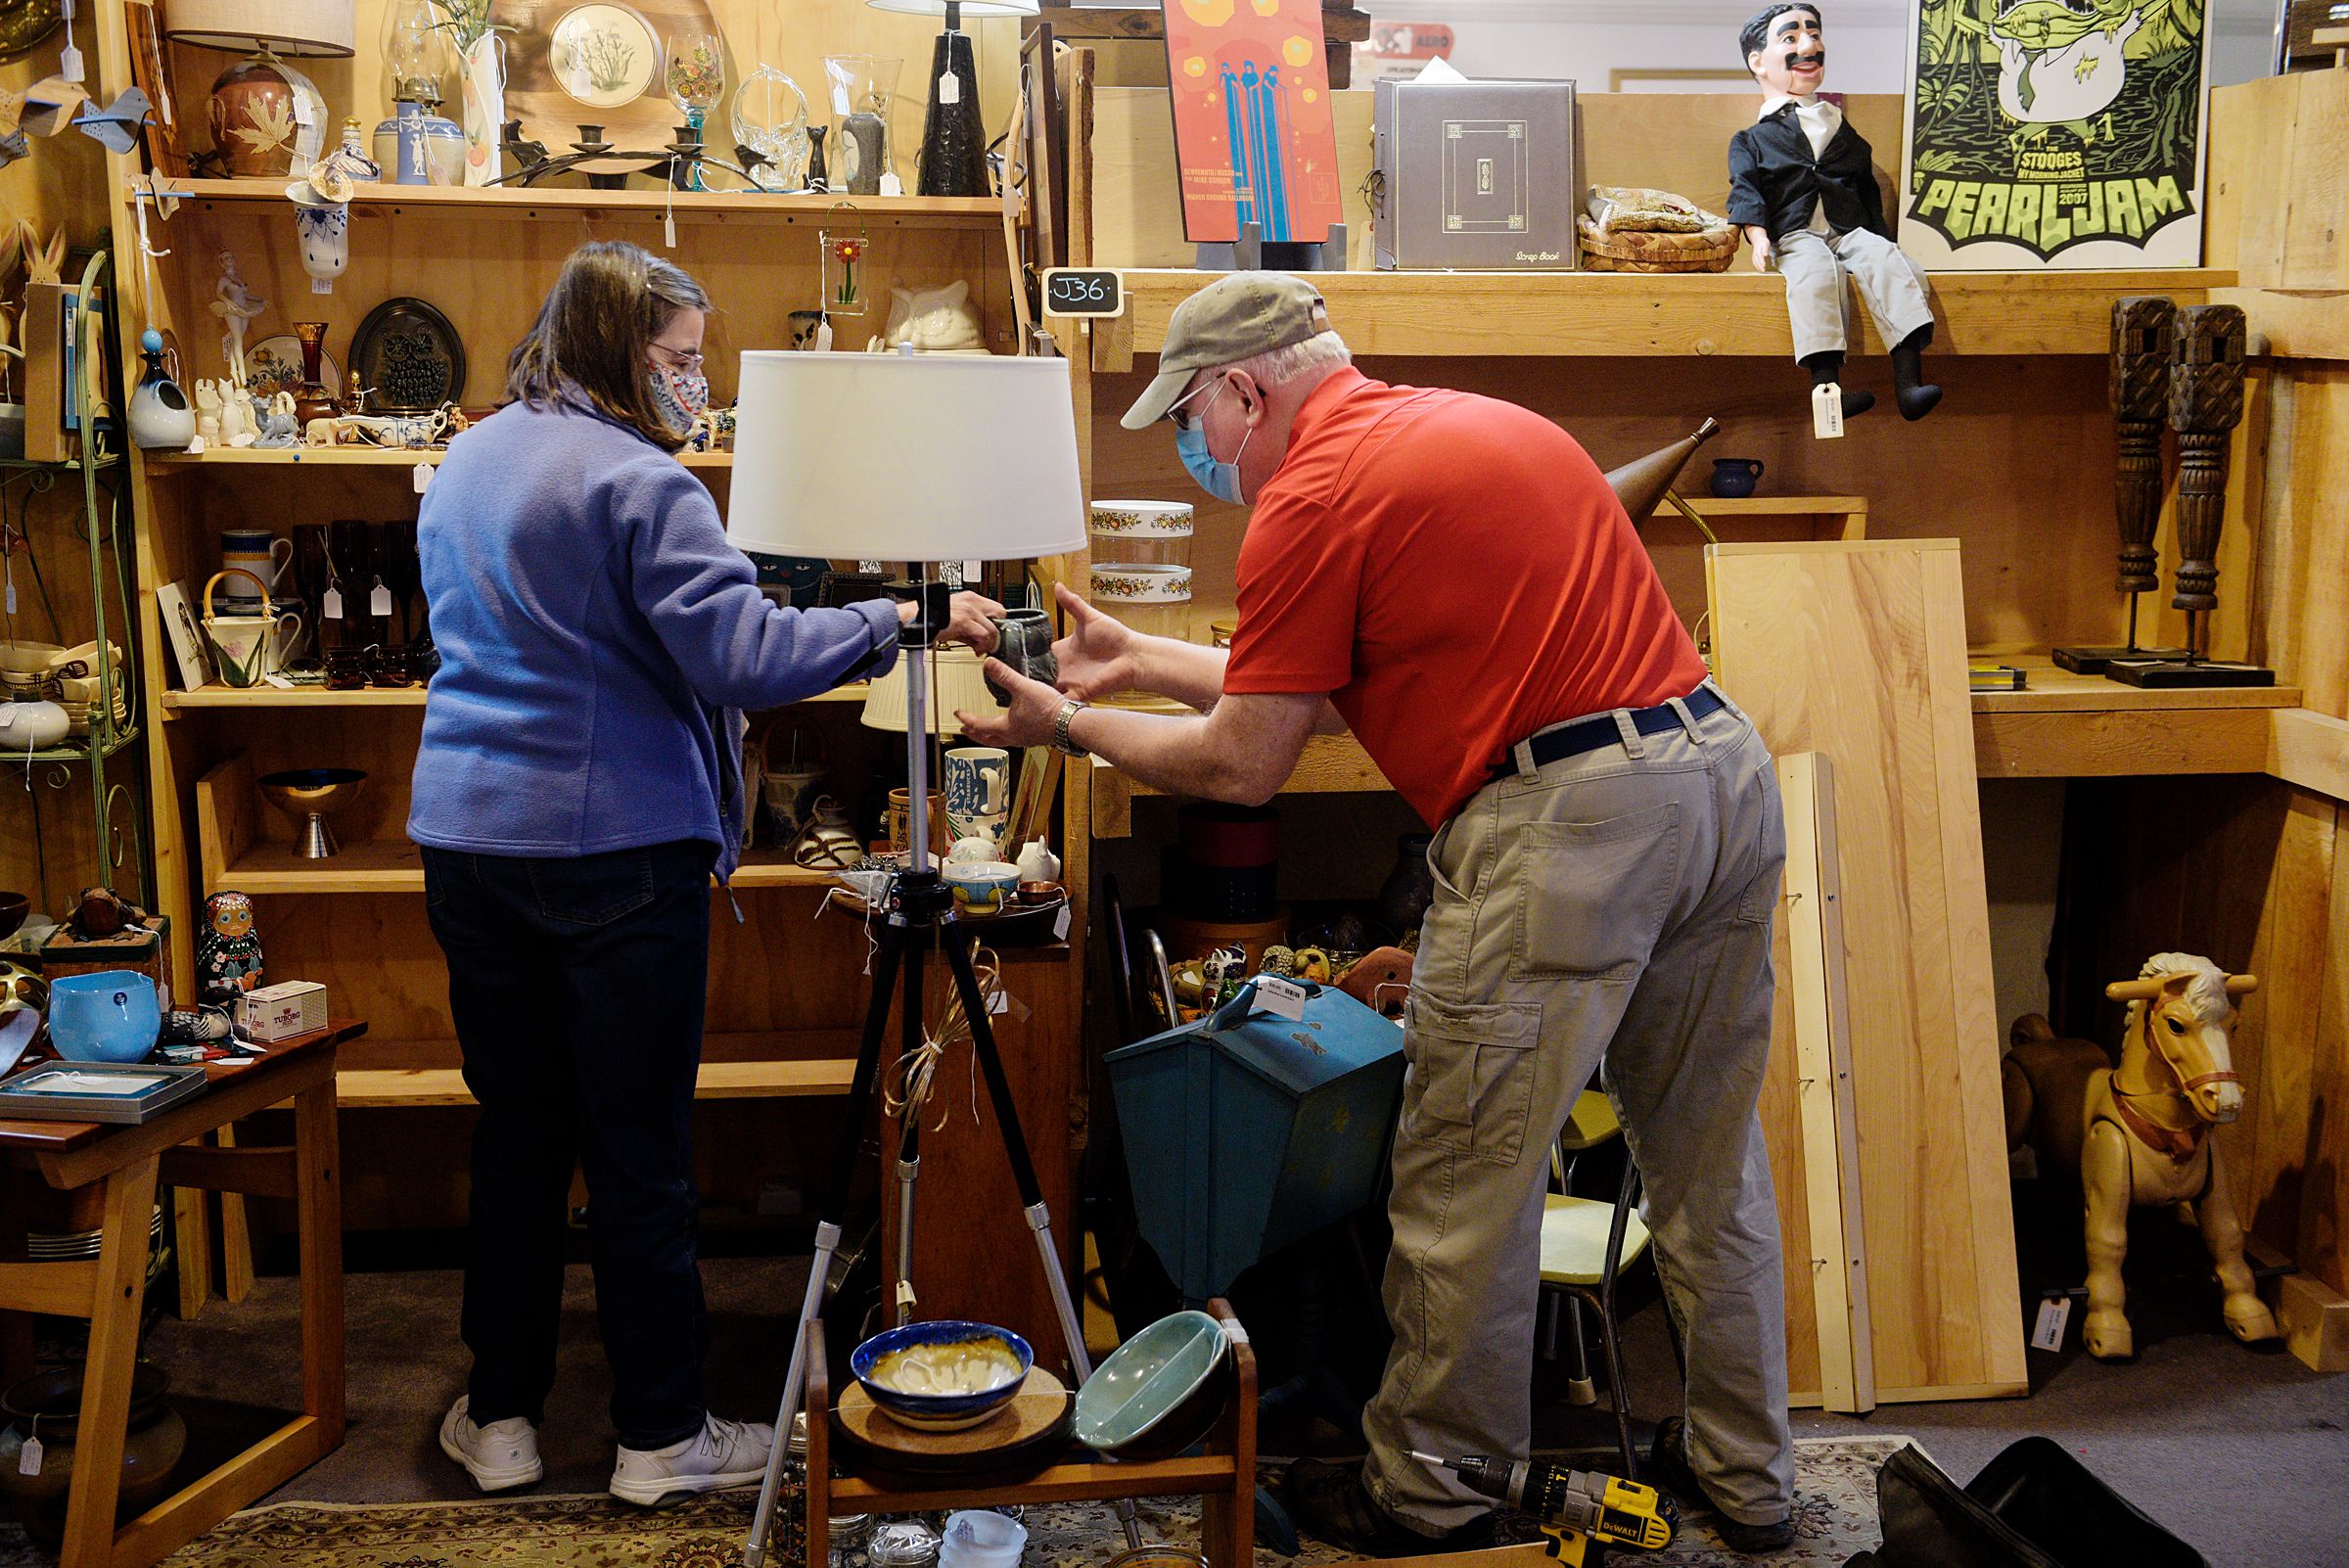 Anne Nix, of Waterbury, Vt., left, and her husband Mike move items from her consignment booth at Consign and Design in West Lebanon, N.H., so they can add new shelves on Friday, March 26, 2021. Nix started to sell items at the store three years ago "as a way to get rid of excess stuff I'd collected over the years that I just wasn't using," she said. (Valley News - James M. Patterson) Copyright Valley News. May not be reprinted or used online without permission. Send requests to permission@vnews.com.